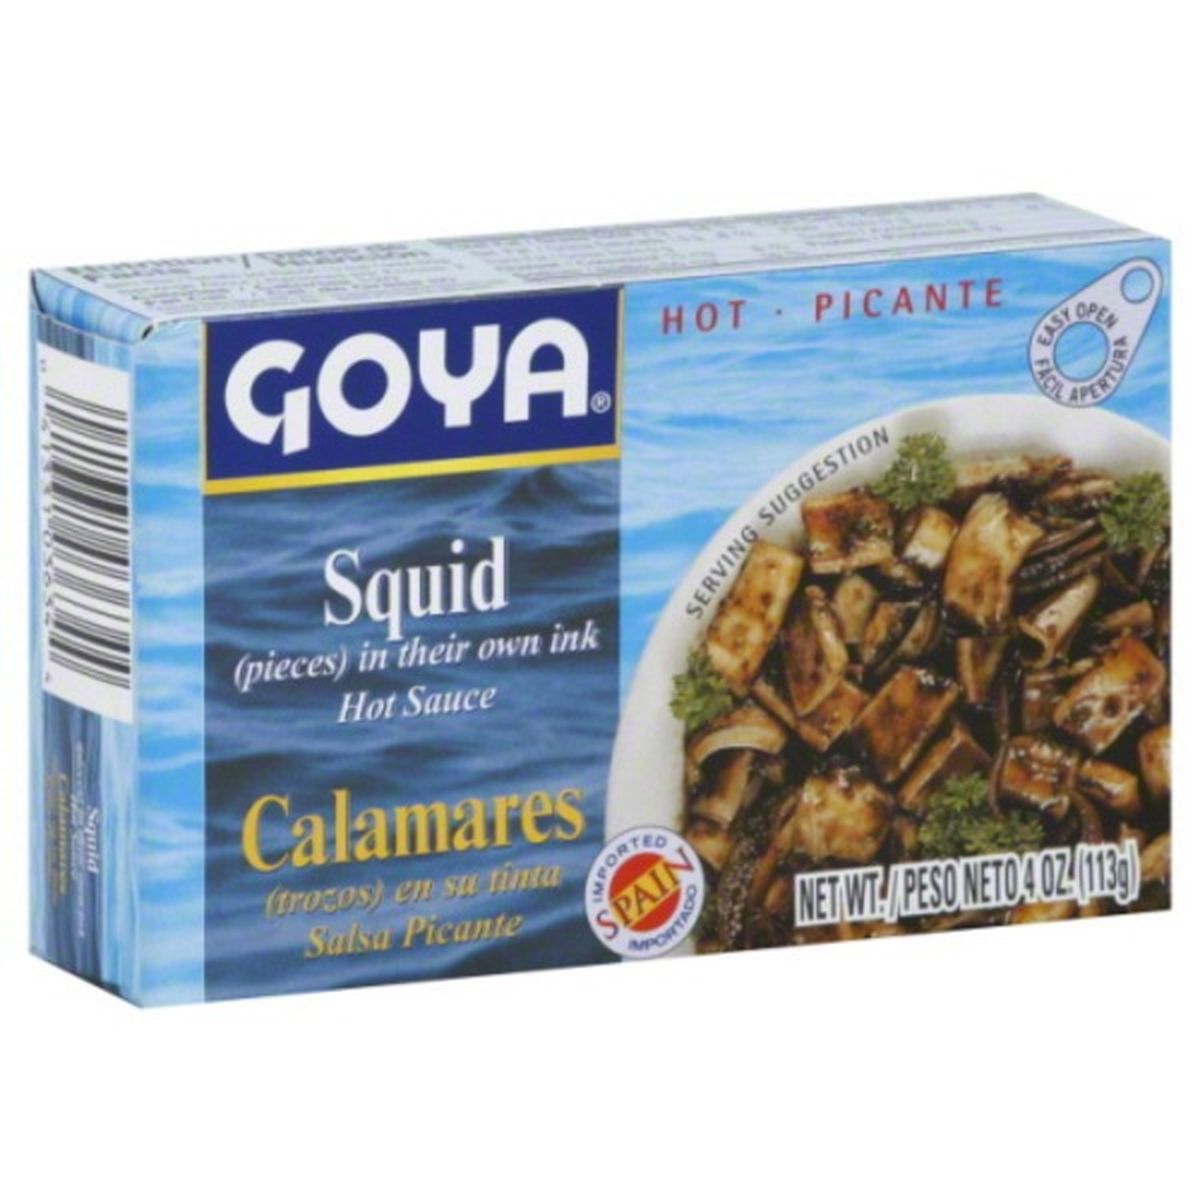 Calories in Goya Squid, Pieces, in their Own Ink, Hot Sauce